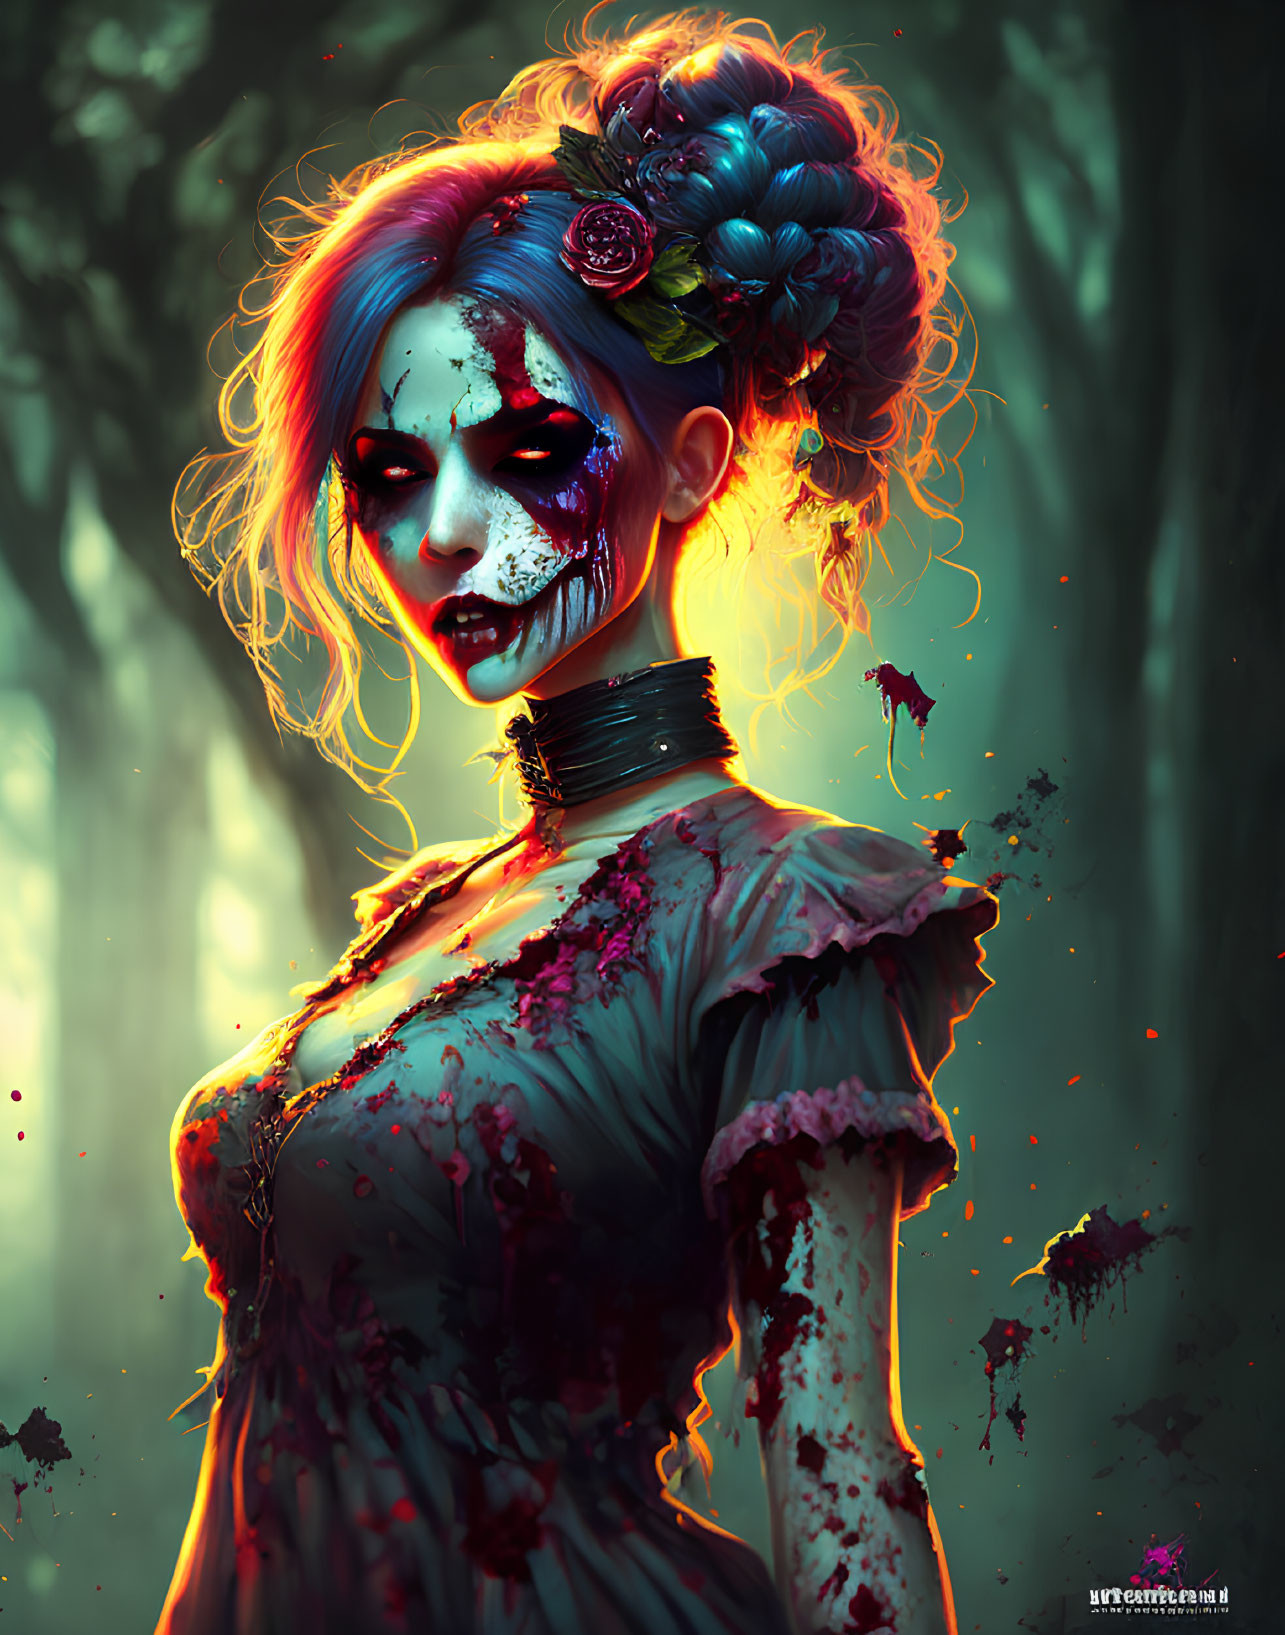 Woman with Blue Hair and Skull Face Paint in Victorian Dress against Dark Forest